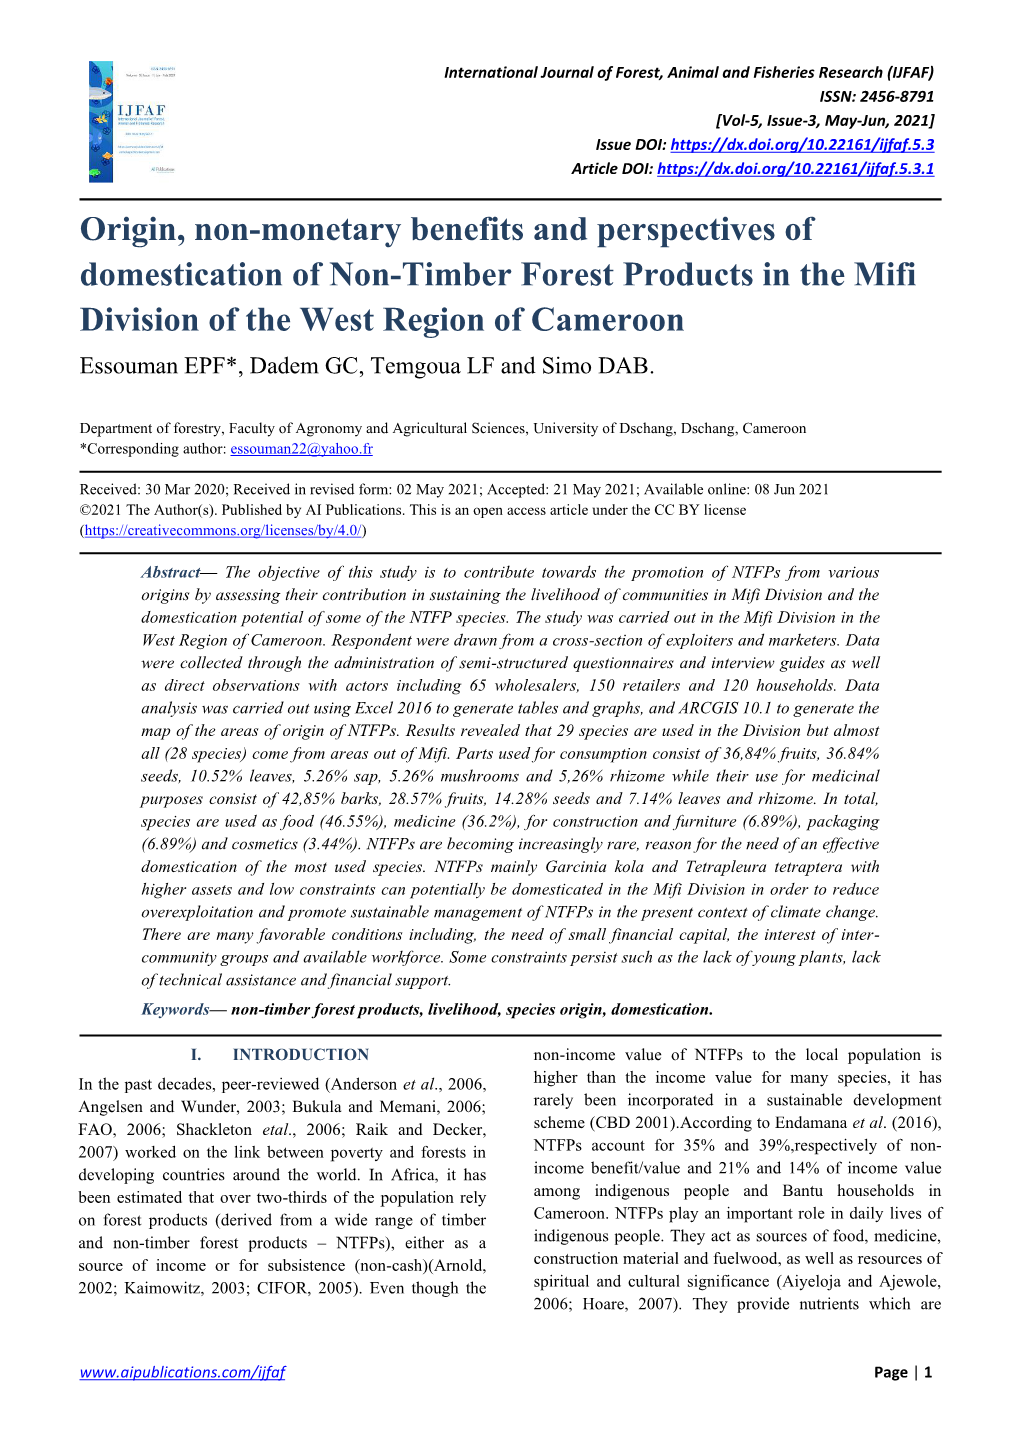 Origin, Non-Monetary Benefits and Perspectives of Domestication of Non-Timber Forest Products in the Mifi Division of the West R